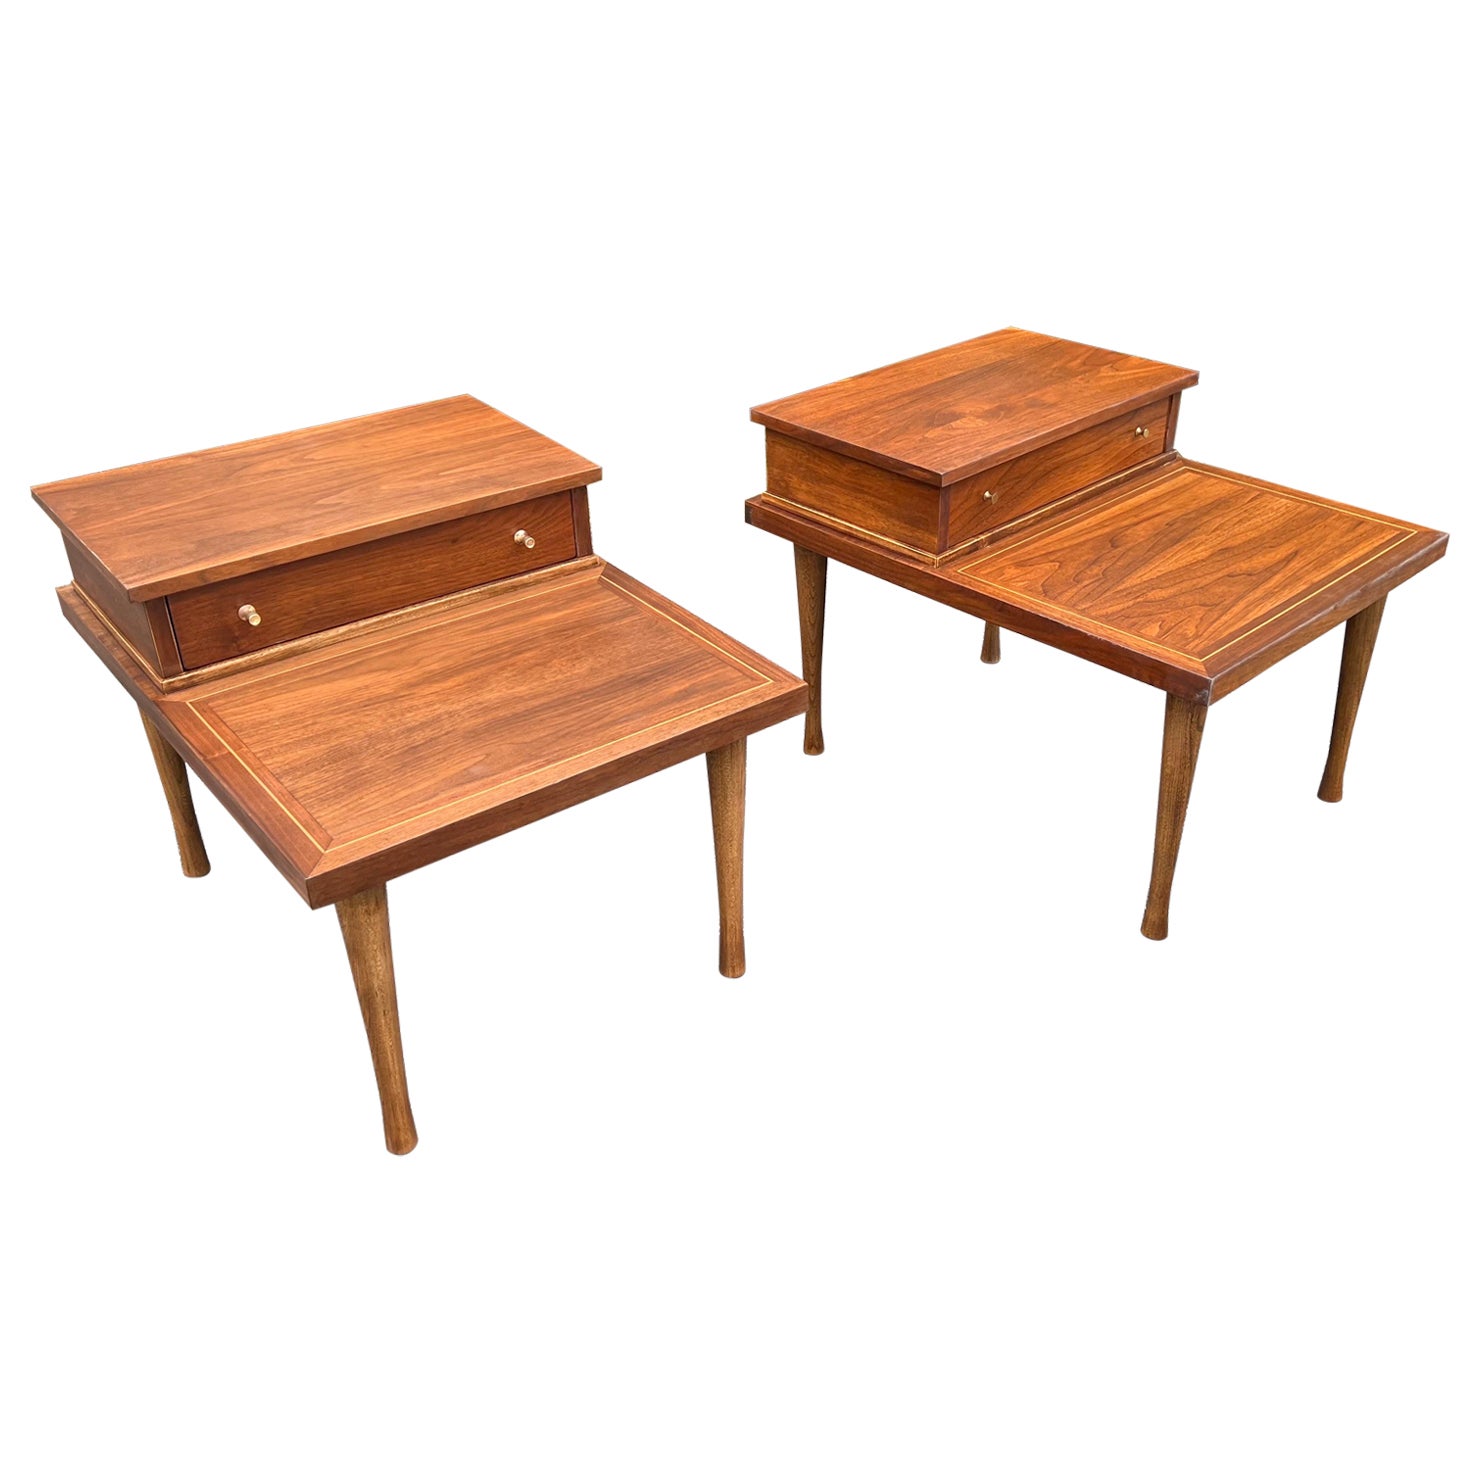 Pair of Mid-20th Century Modern American of Martinsville Side Tables For Sale